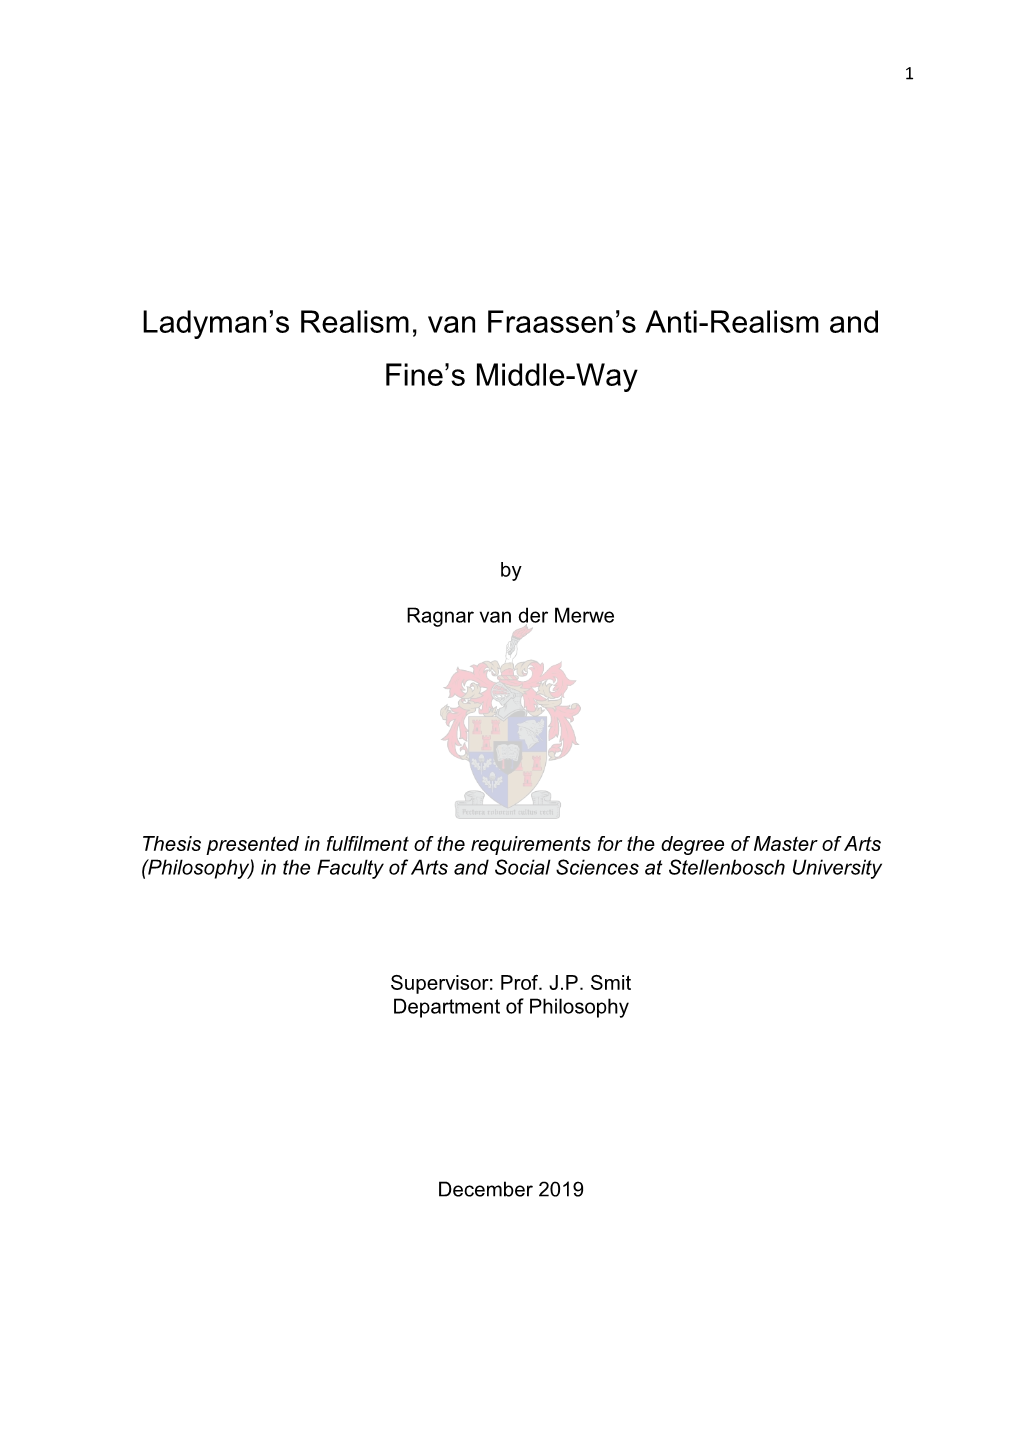 Ladyman's Realism, Van Fraassen's Anti-Realism and Fine's Middle-Way